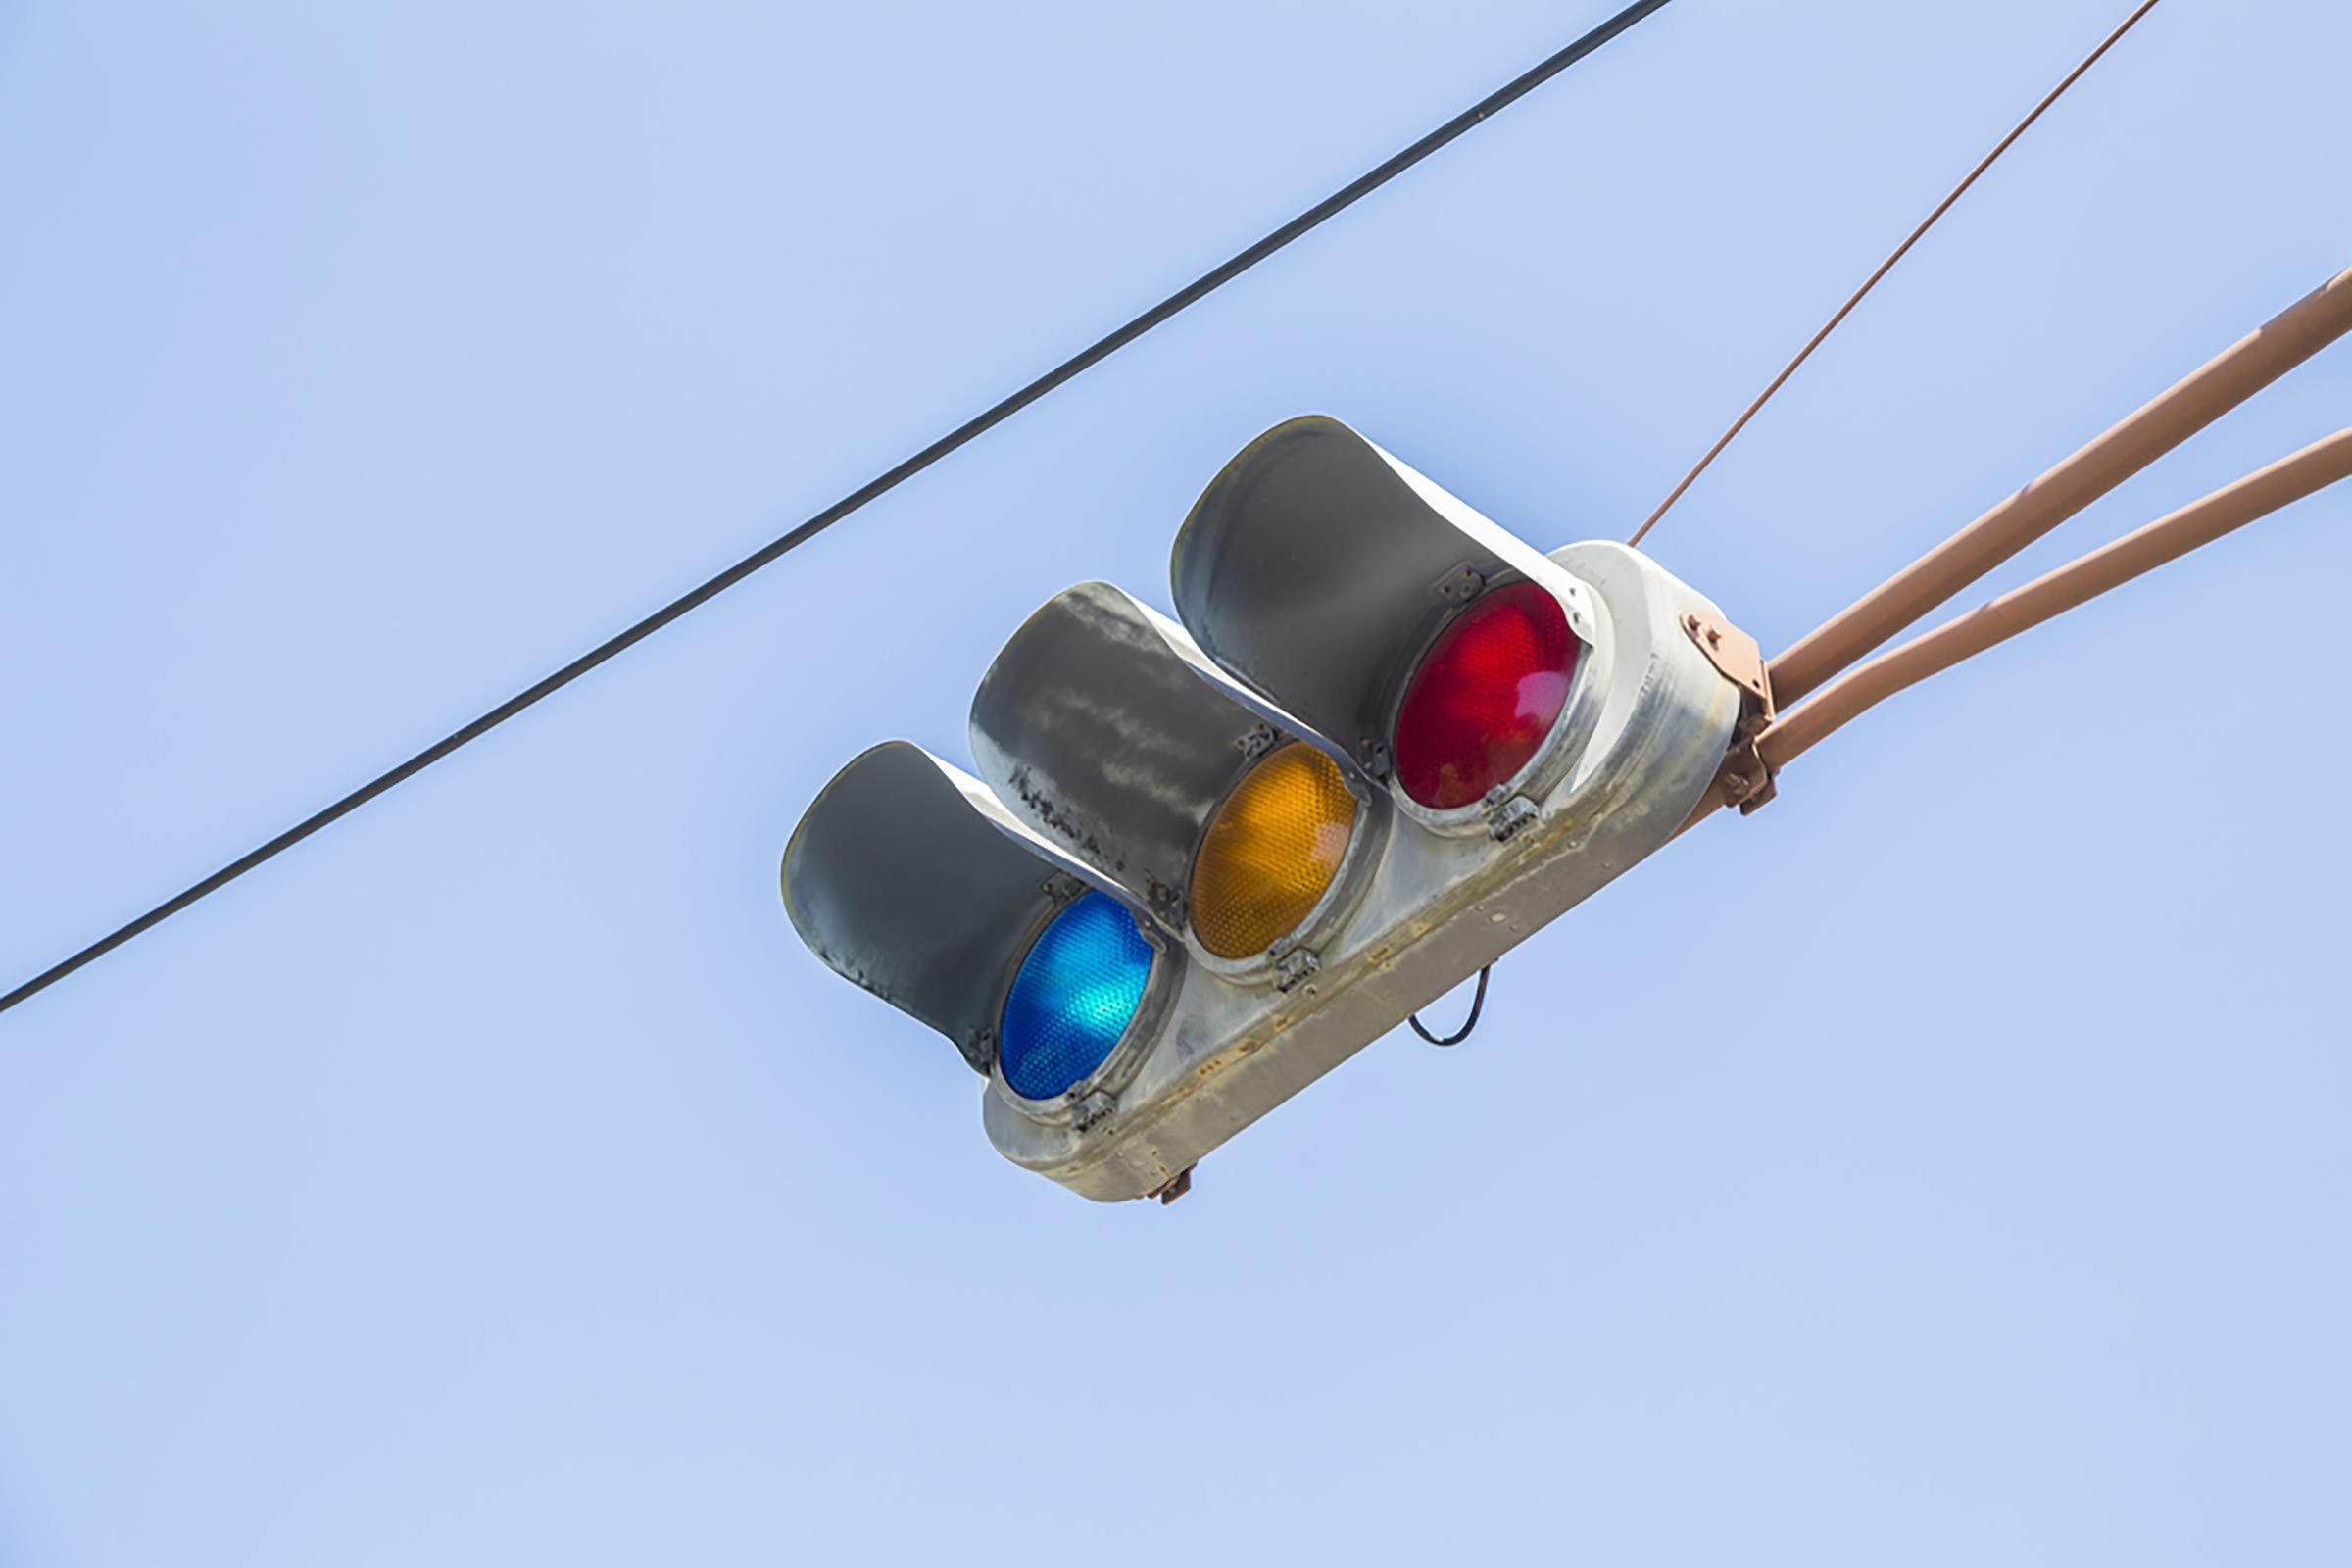 Why are stop lights blue?